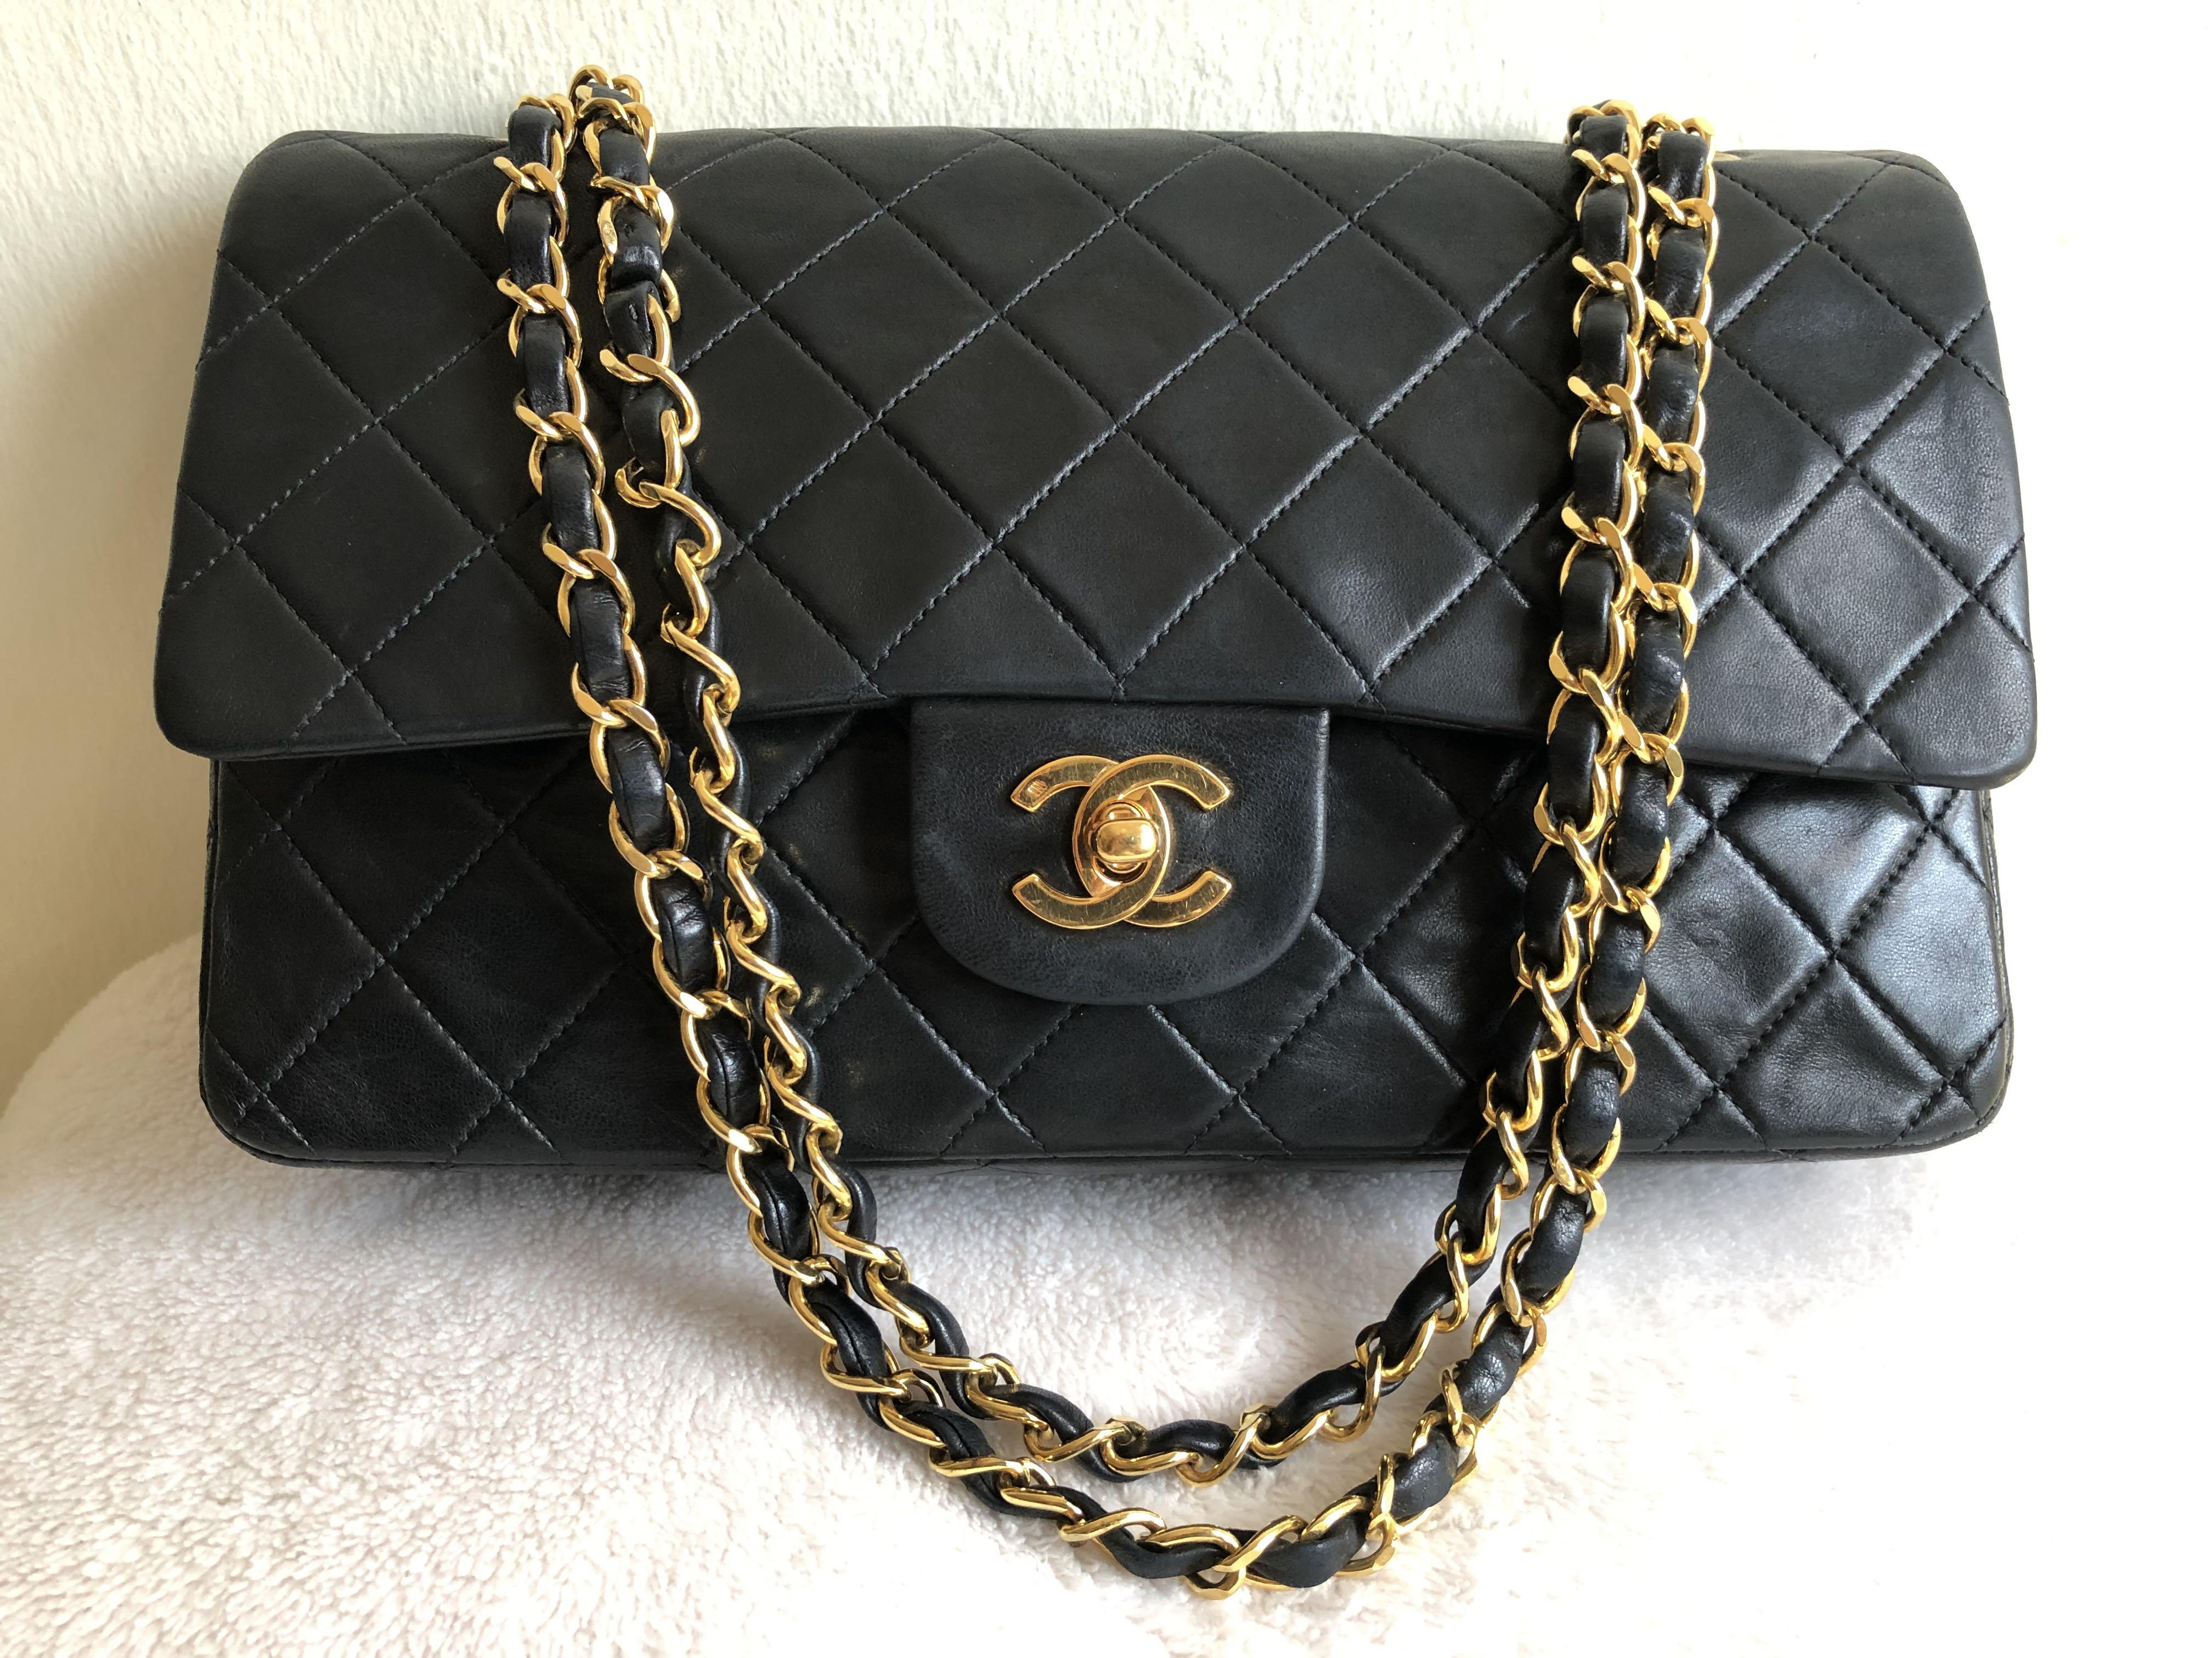 [sold] Chanel vintage classic double flap bag in light beige lambskin gold  hardware [authentic]